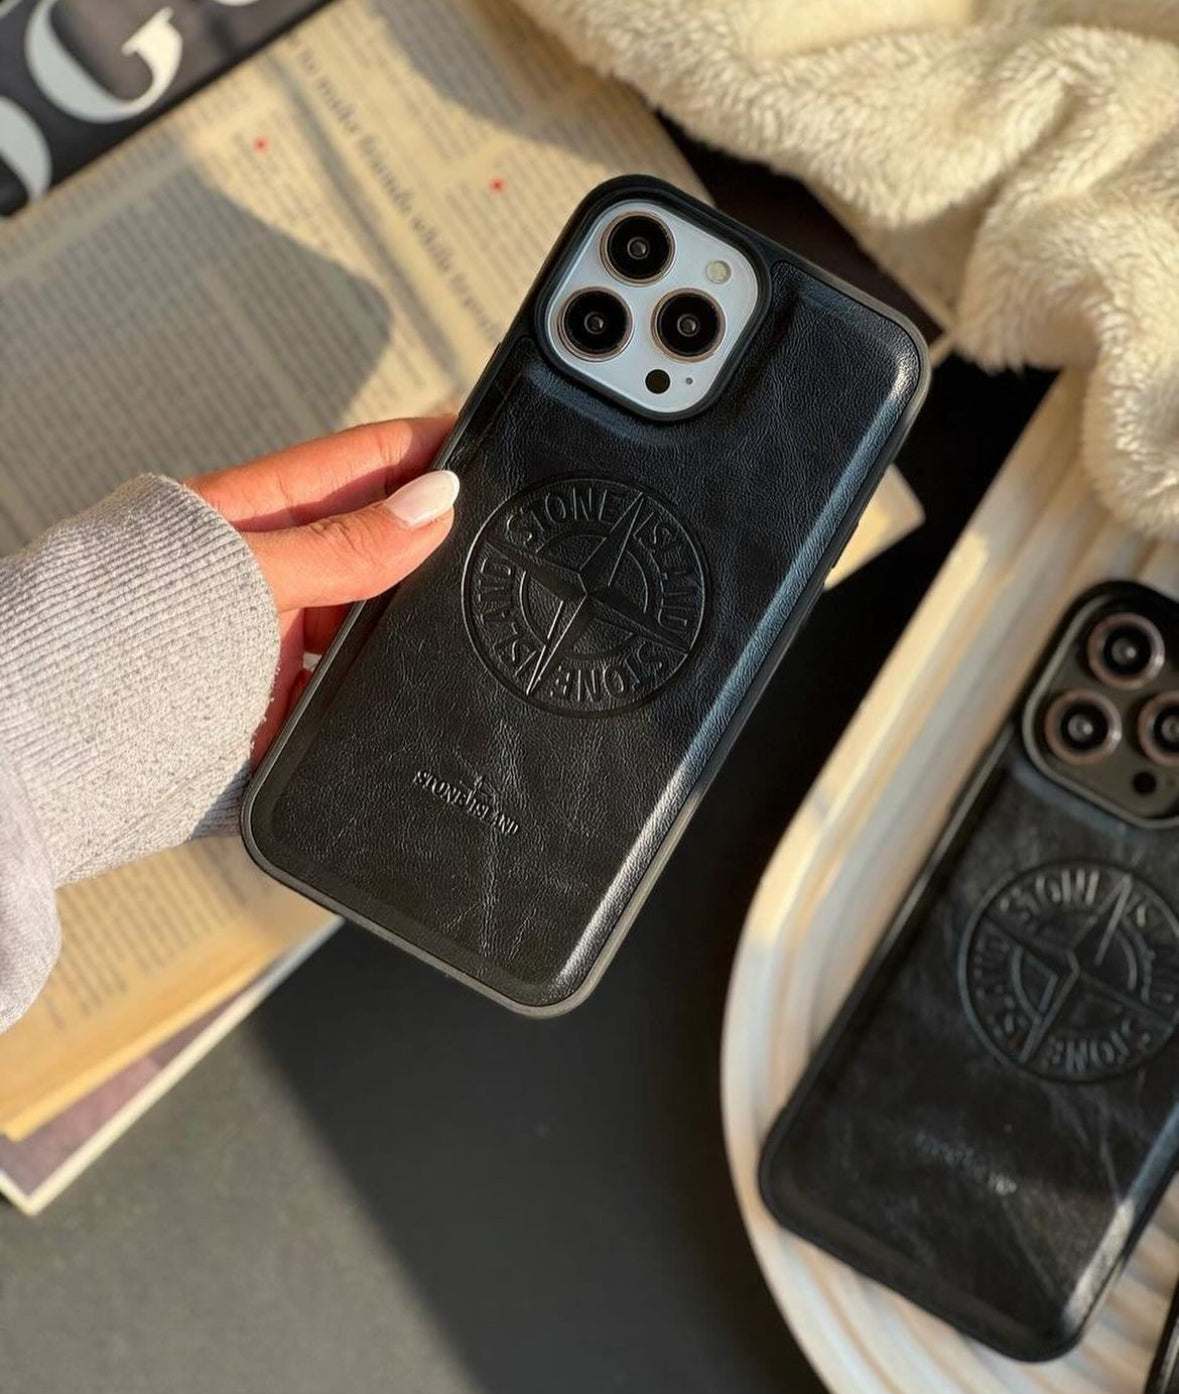 Cover Stone Island for Iphone ADW SHOP